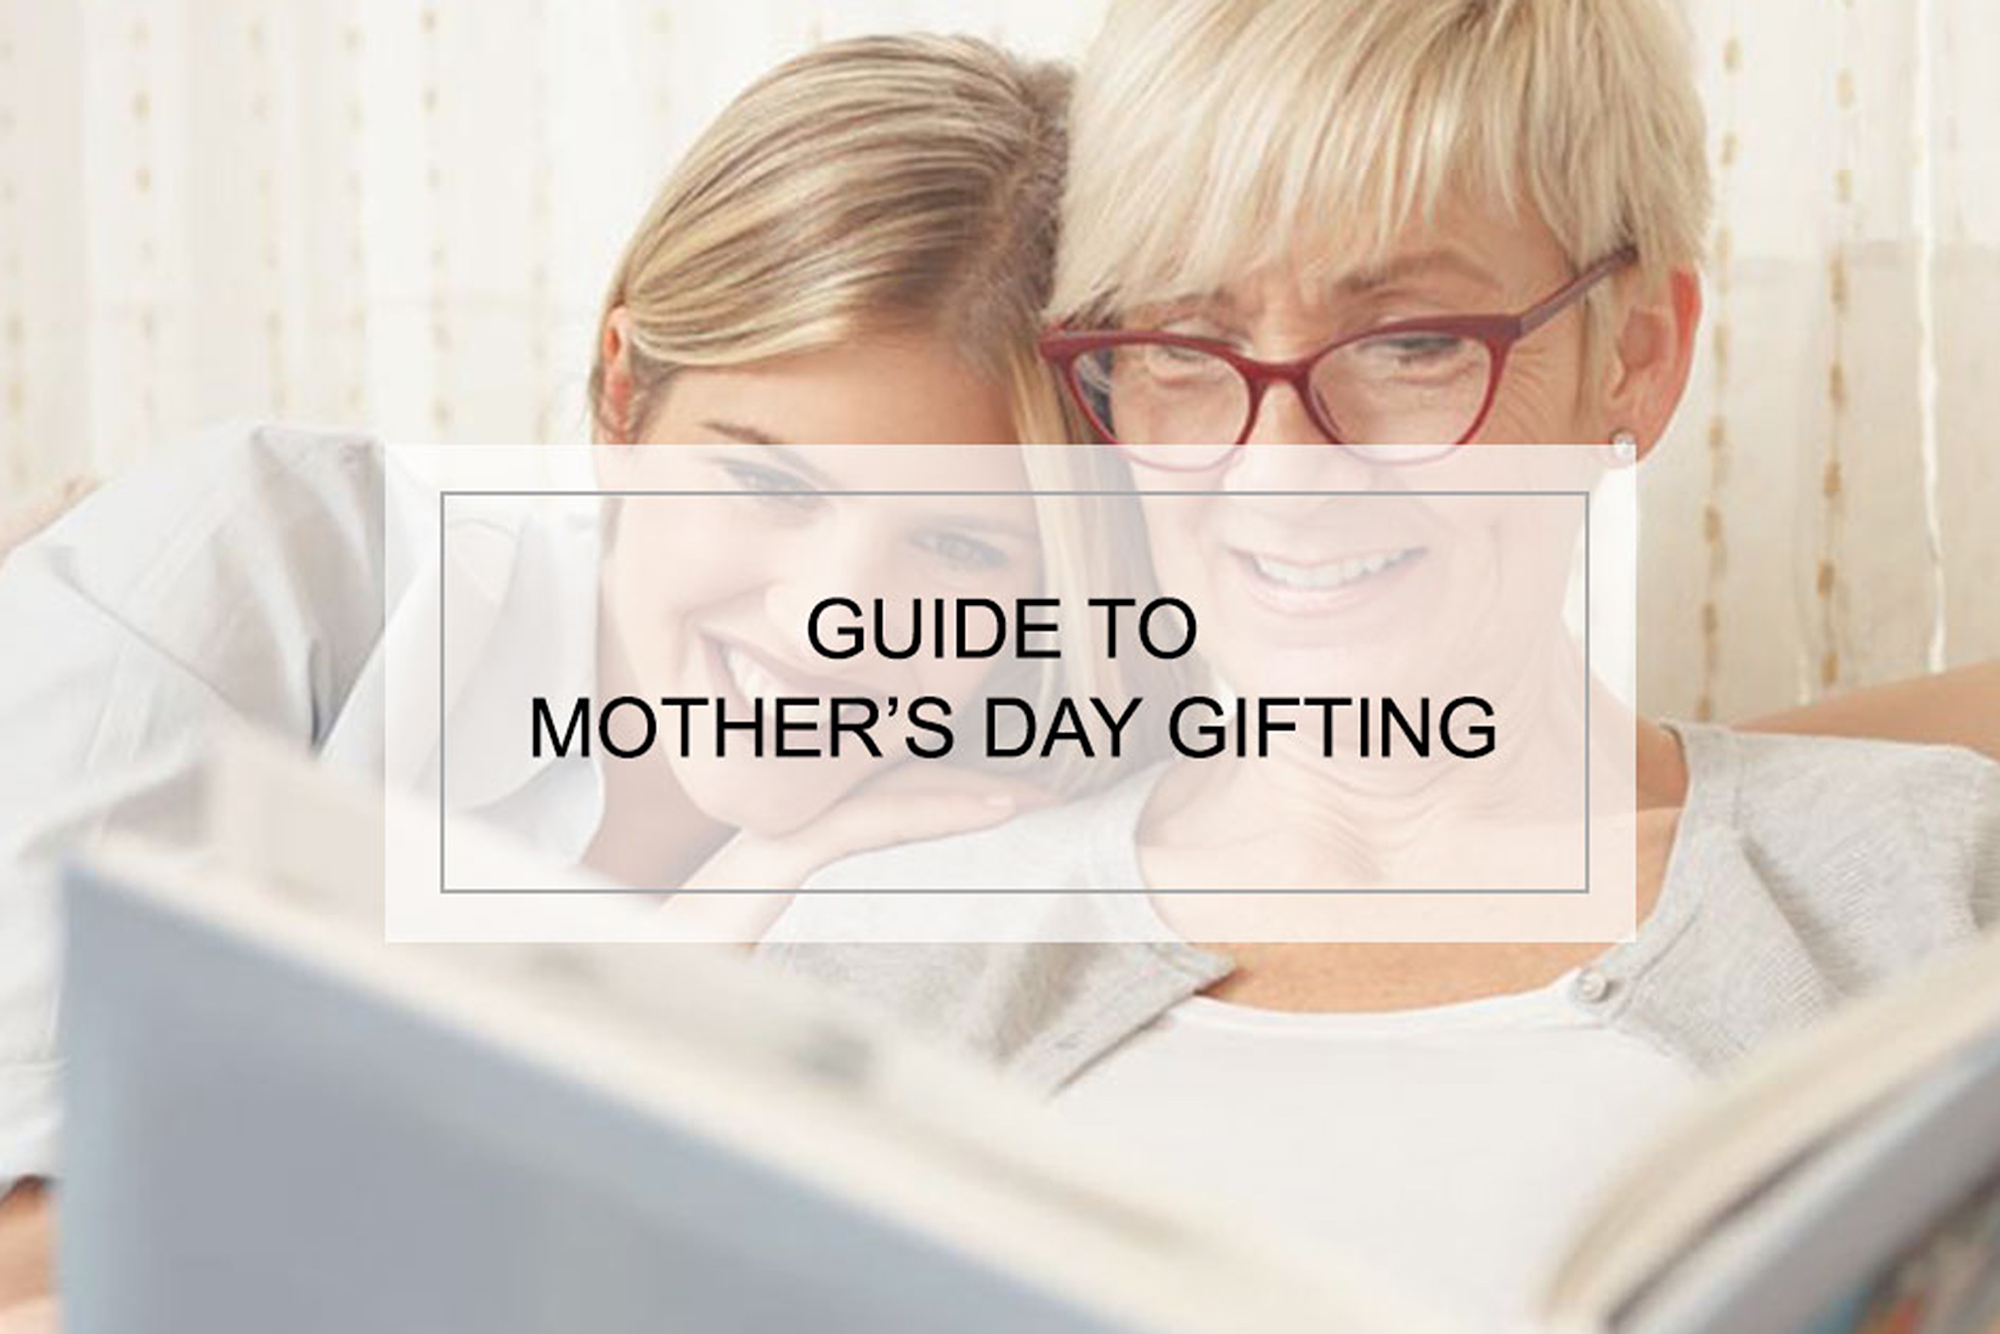 Guide To Mother’s Day Gifting